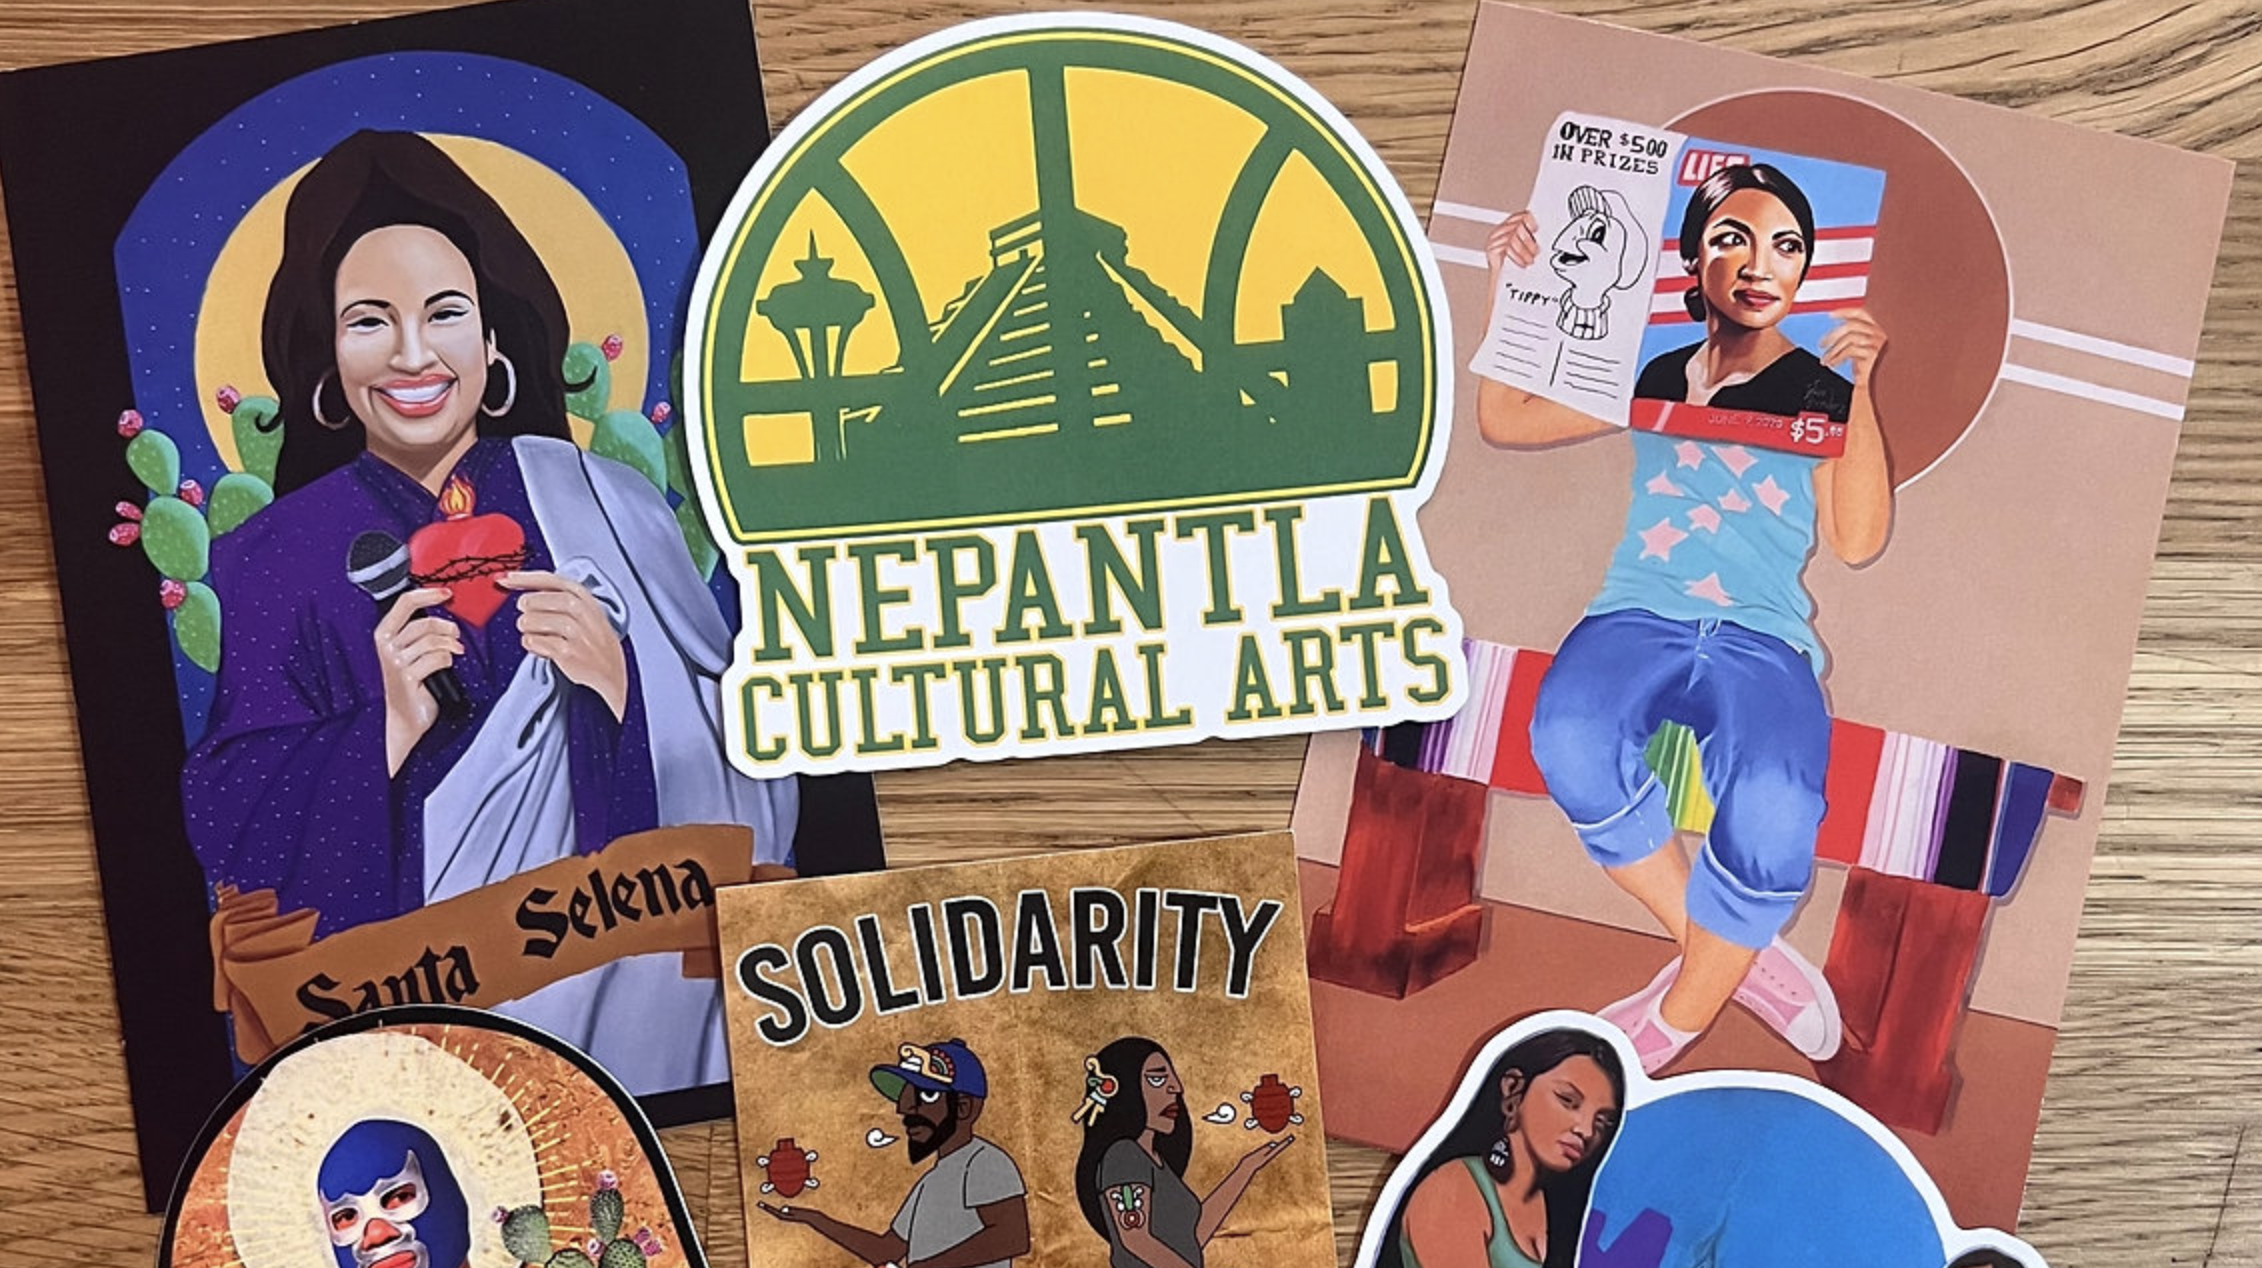 A collection of stickers available at Nepantla Cultural Arts Gallery